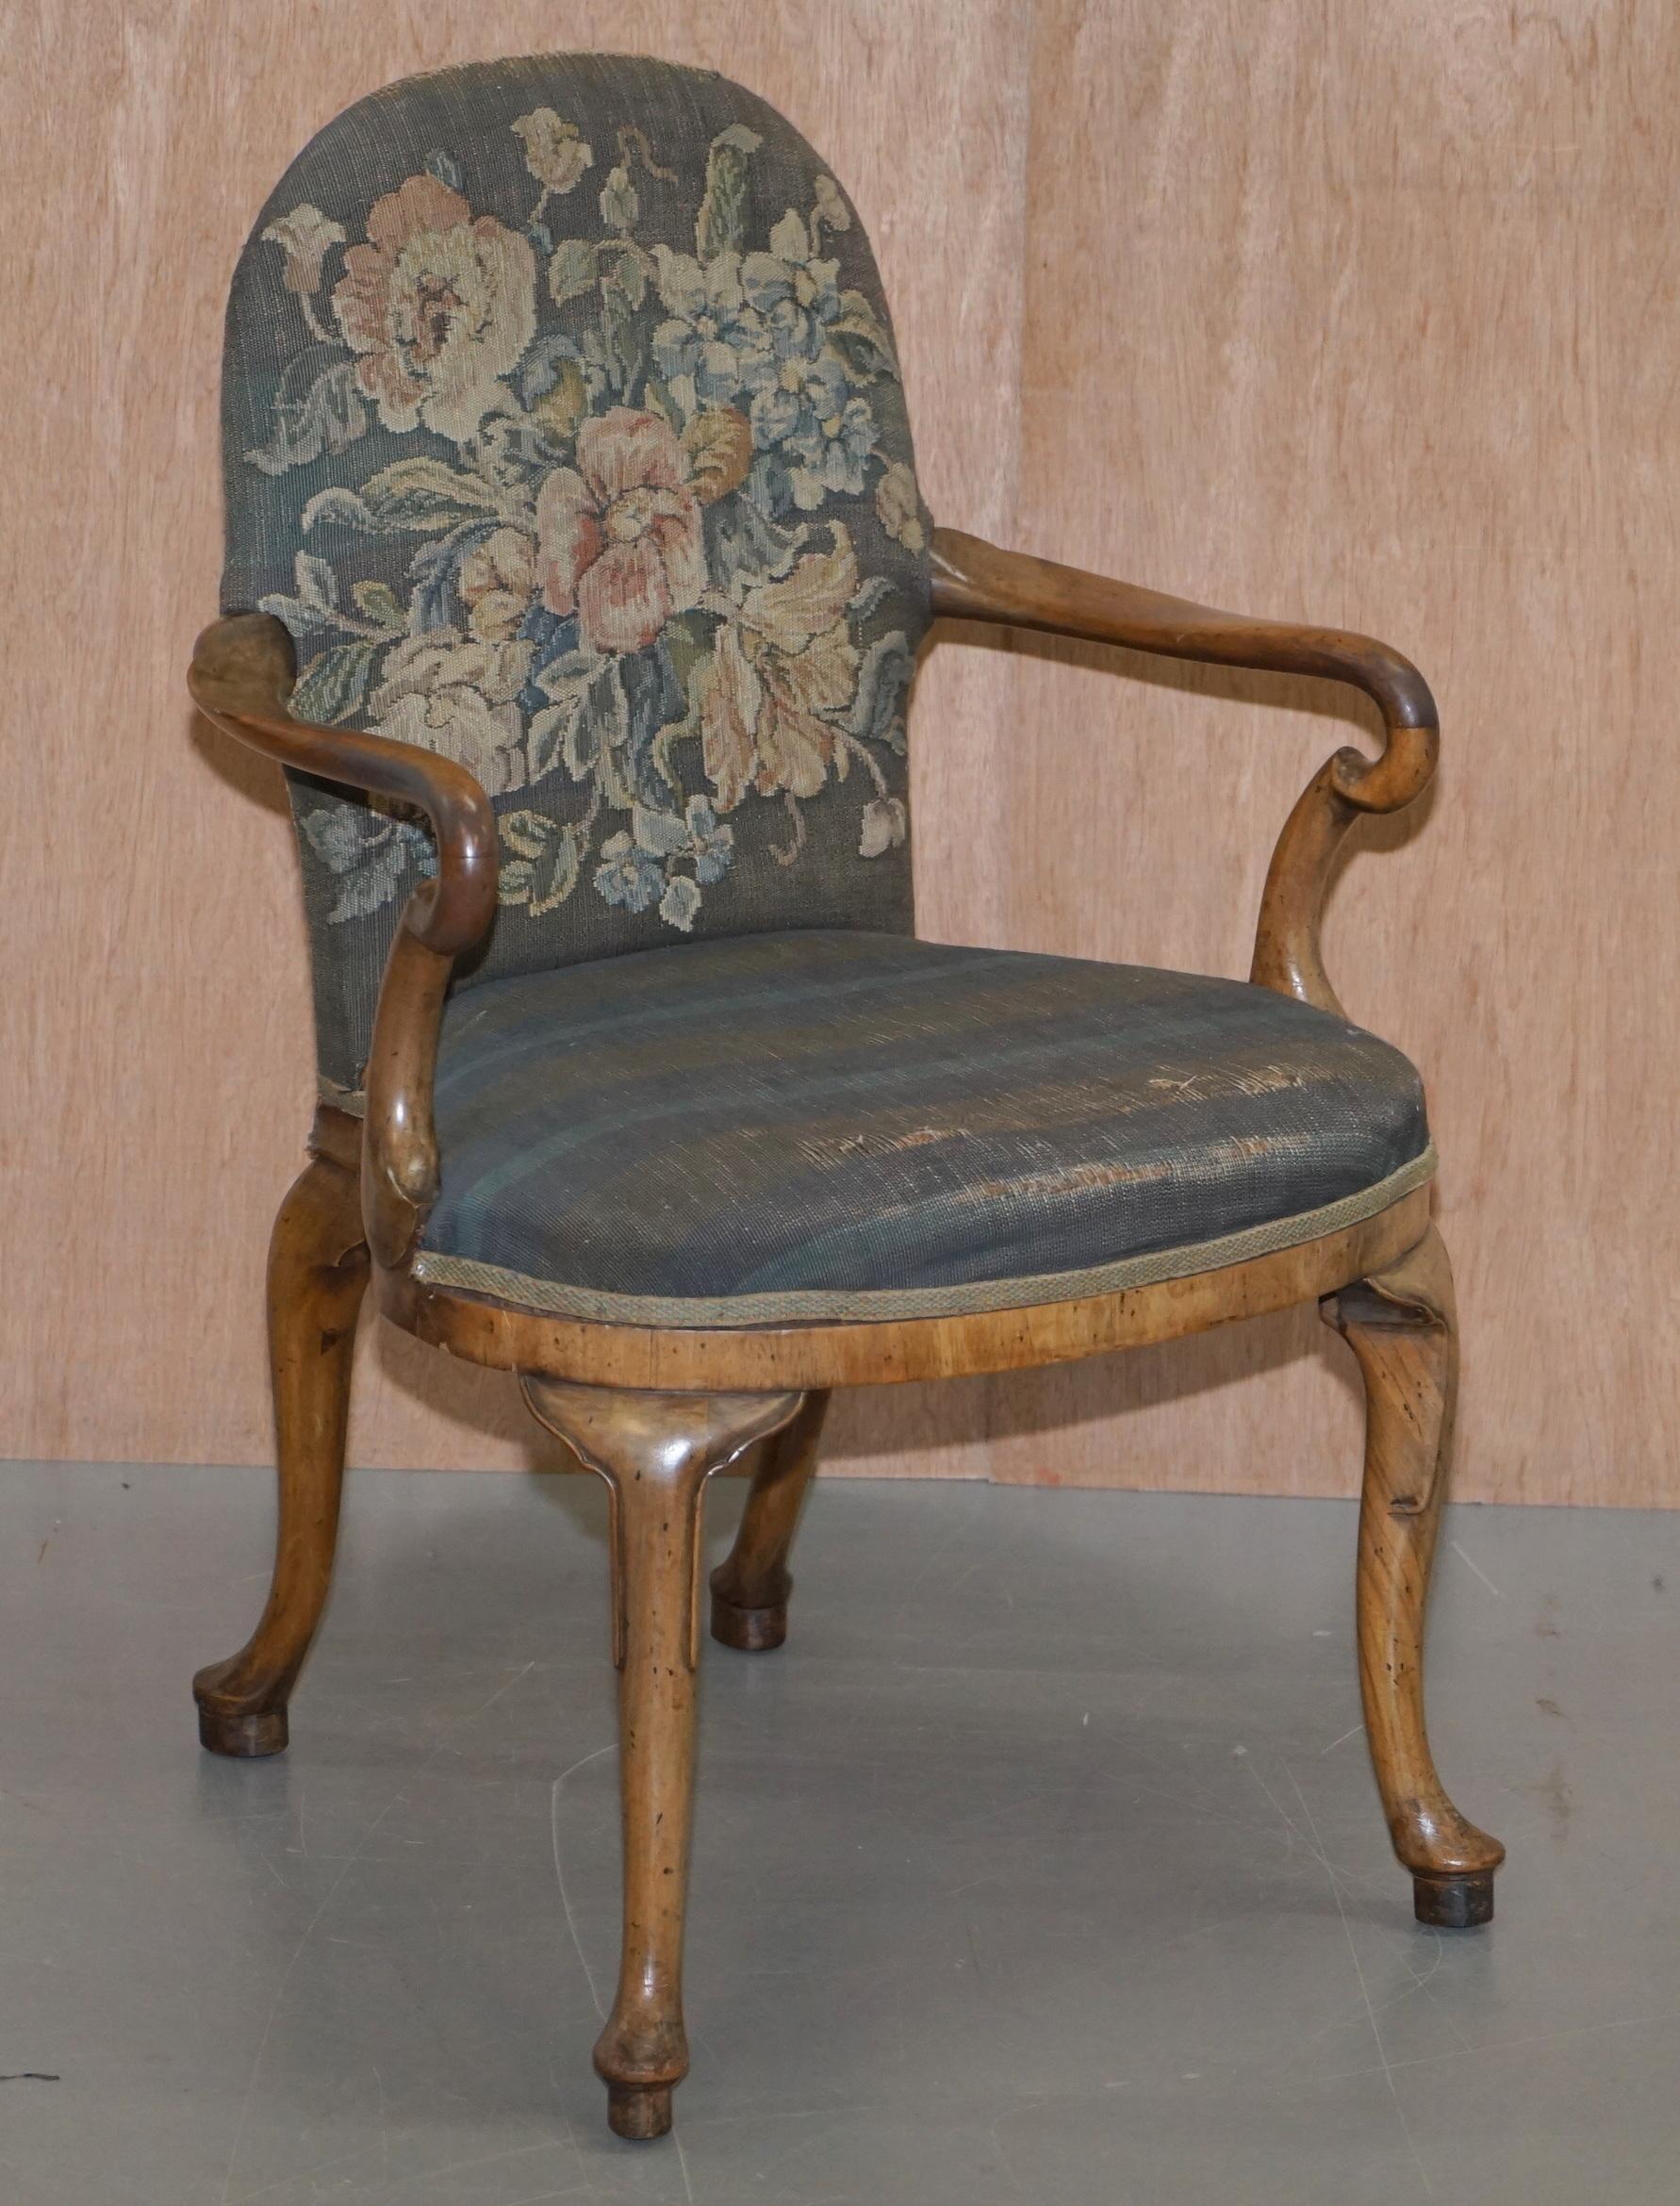 Wimbledon-Furniture

Wimbledon-Furniture is delighted to offer for sale this stunning pair of period Victorian original upholstery English carver armchairs

Please note the delivery fee listed is just a guide, it covers within the M25 only, for